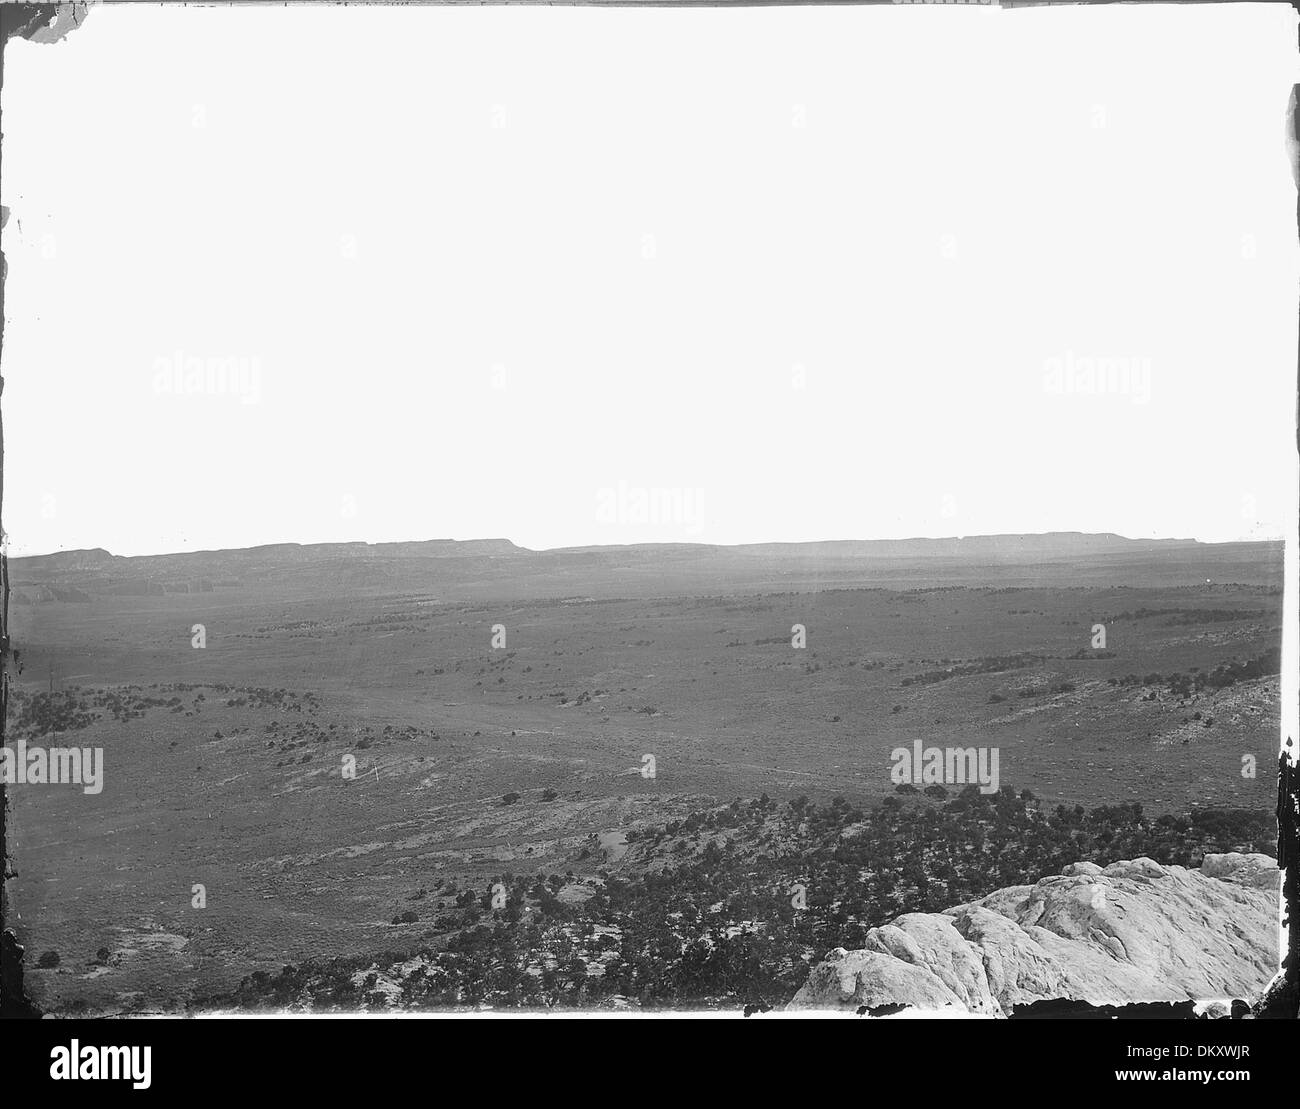 (Old No. 124) North end of Zuni Uplift, from west of Fort Wingate, McKinley County, New Mexico., 1871 - 1878 517772 Stock Photo